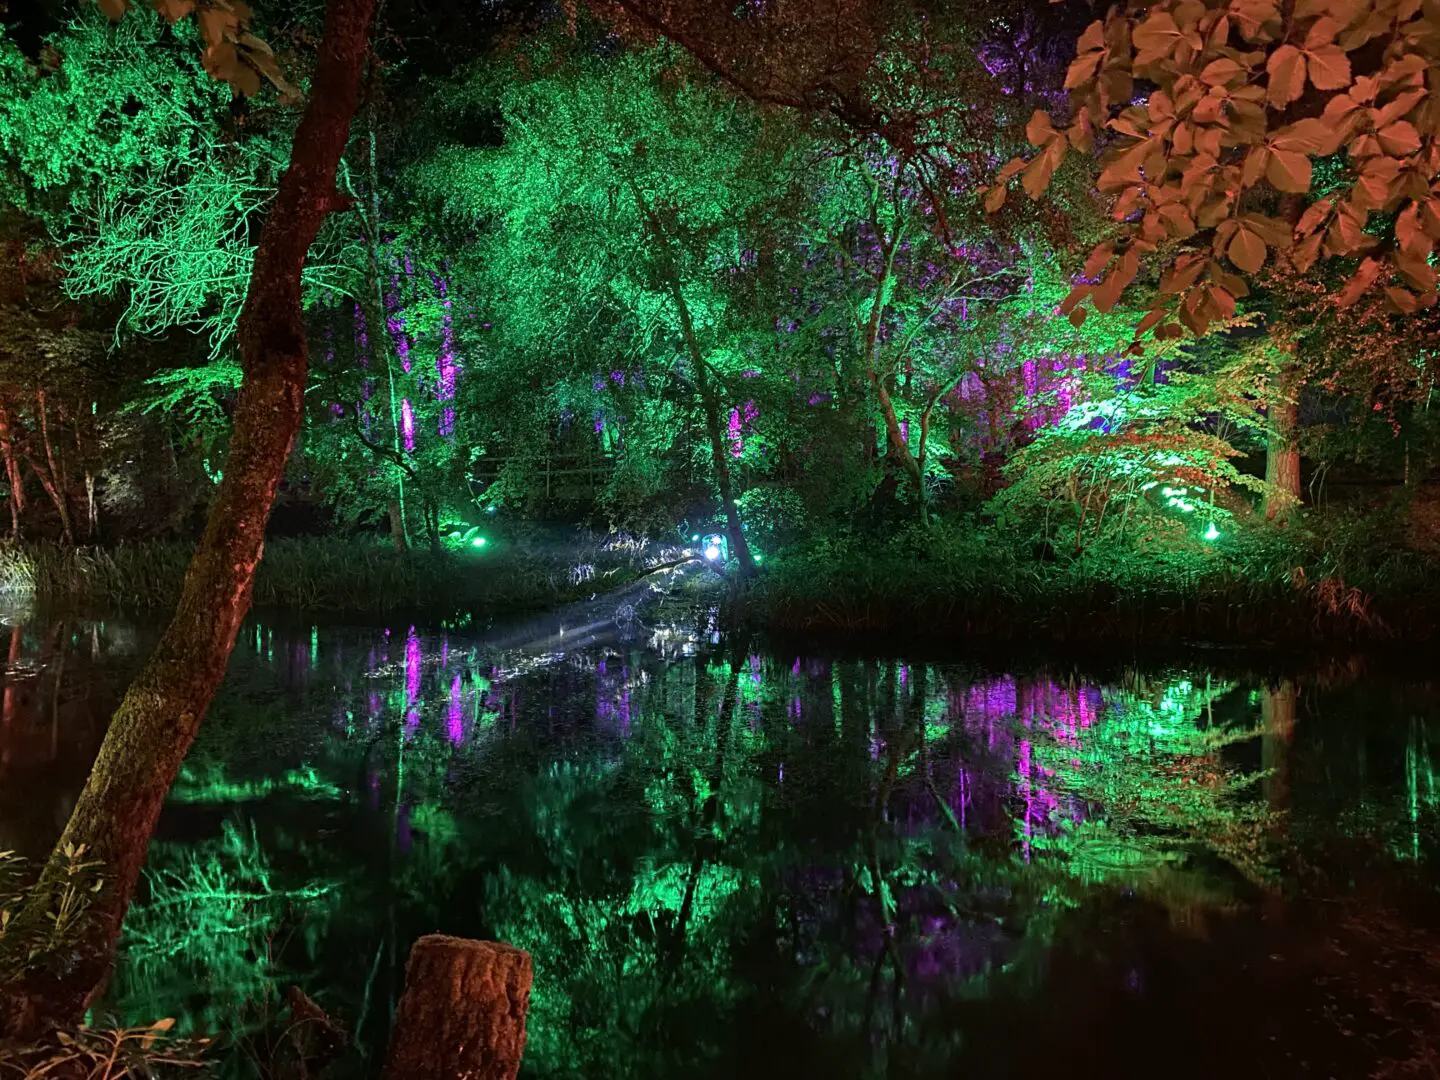 Light show in a forest